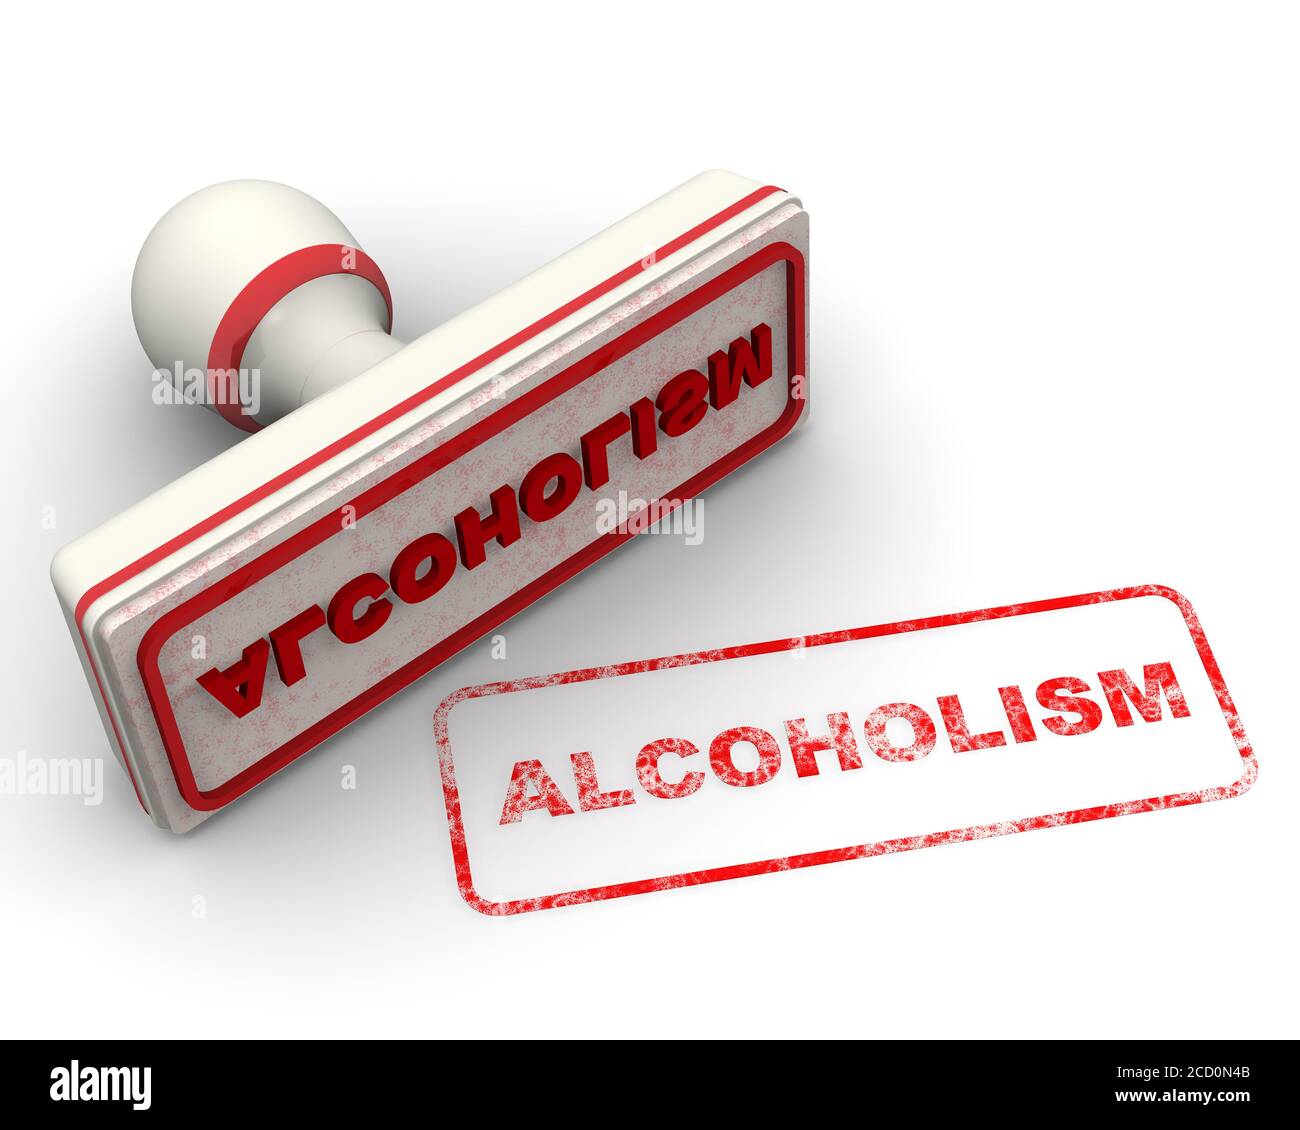 Alcoholism. The stamp and an imprint. White stamp and red imprint ALCOHOLISM on white surface. 3D illustration Stock Photo